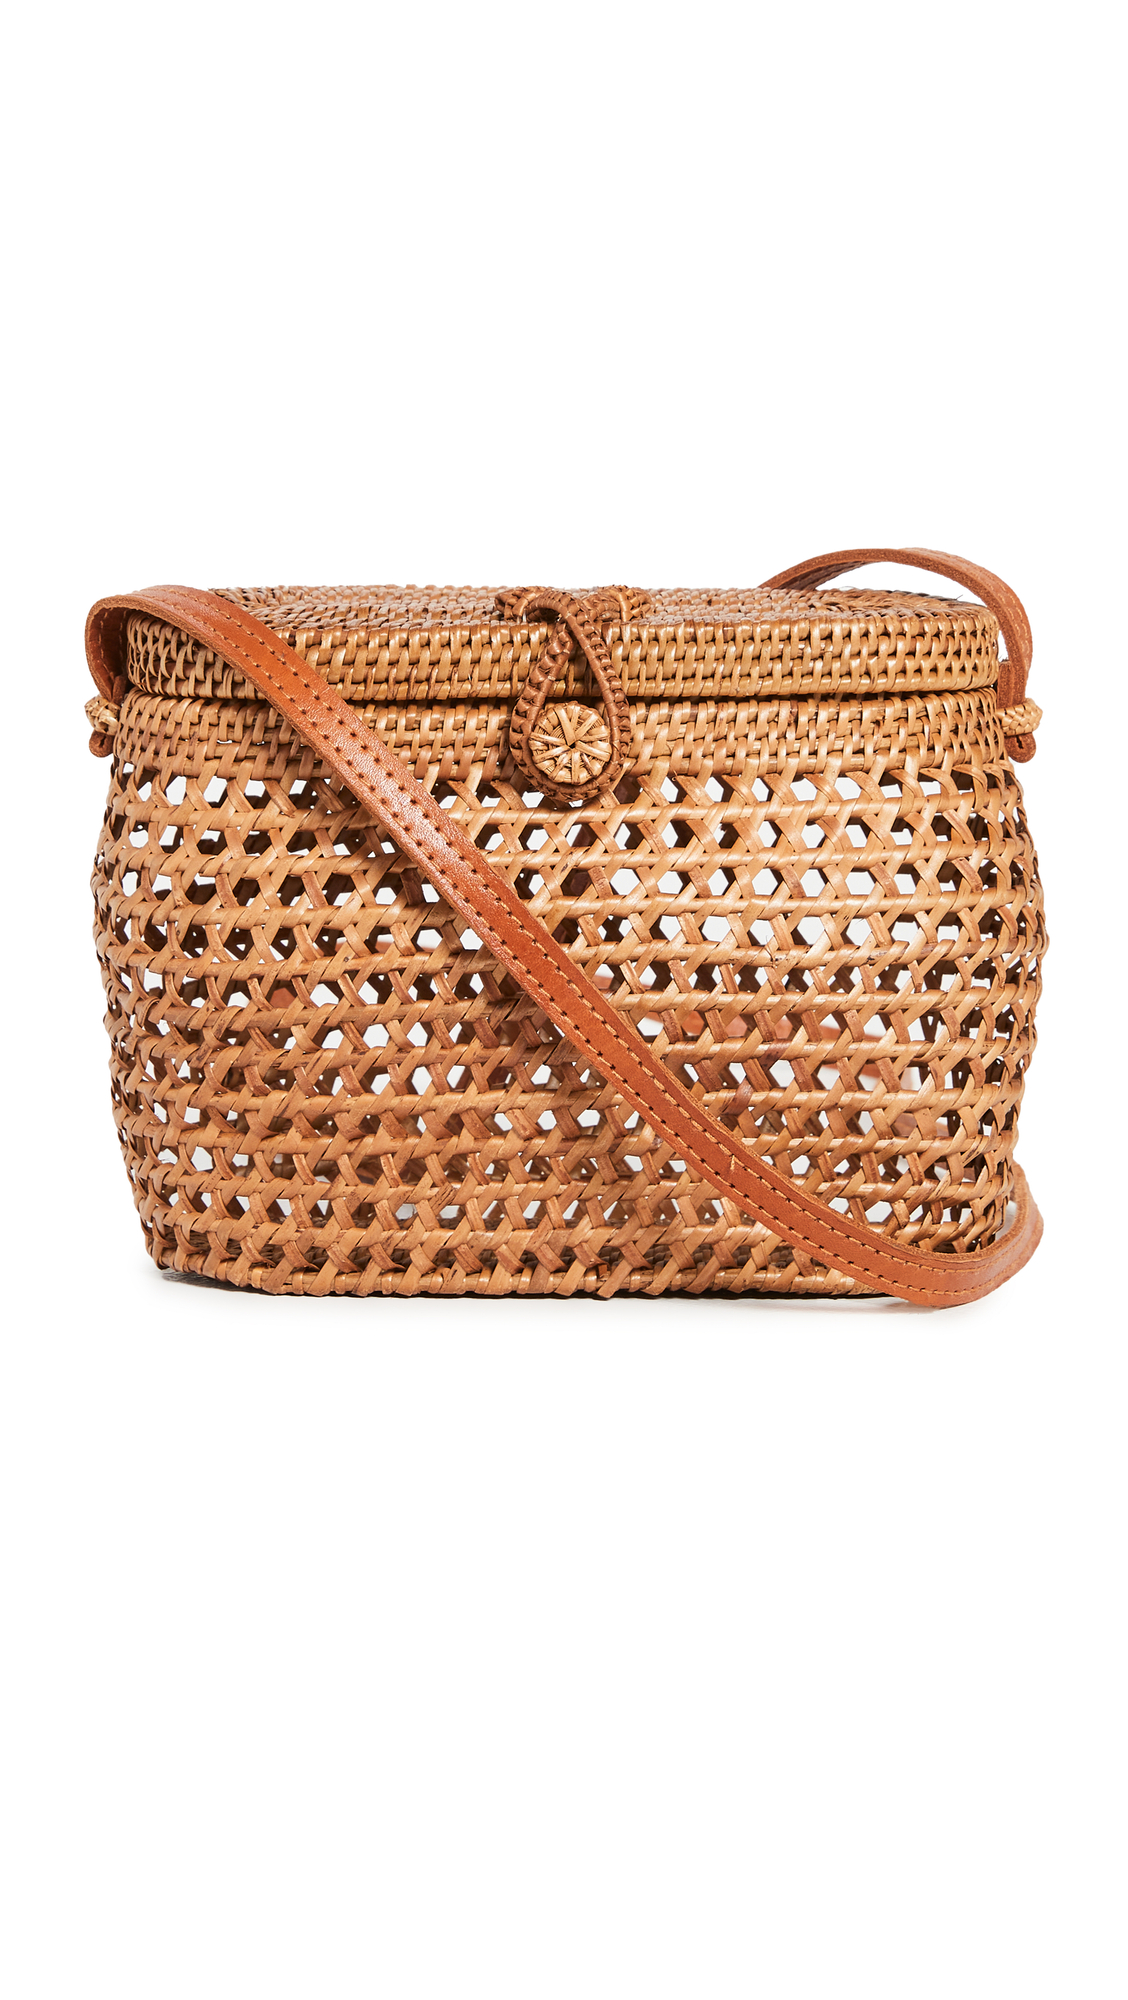 Your Summer Guide to Woven Straw Accessories » coco bassey